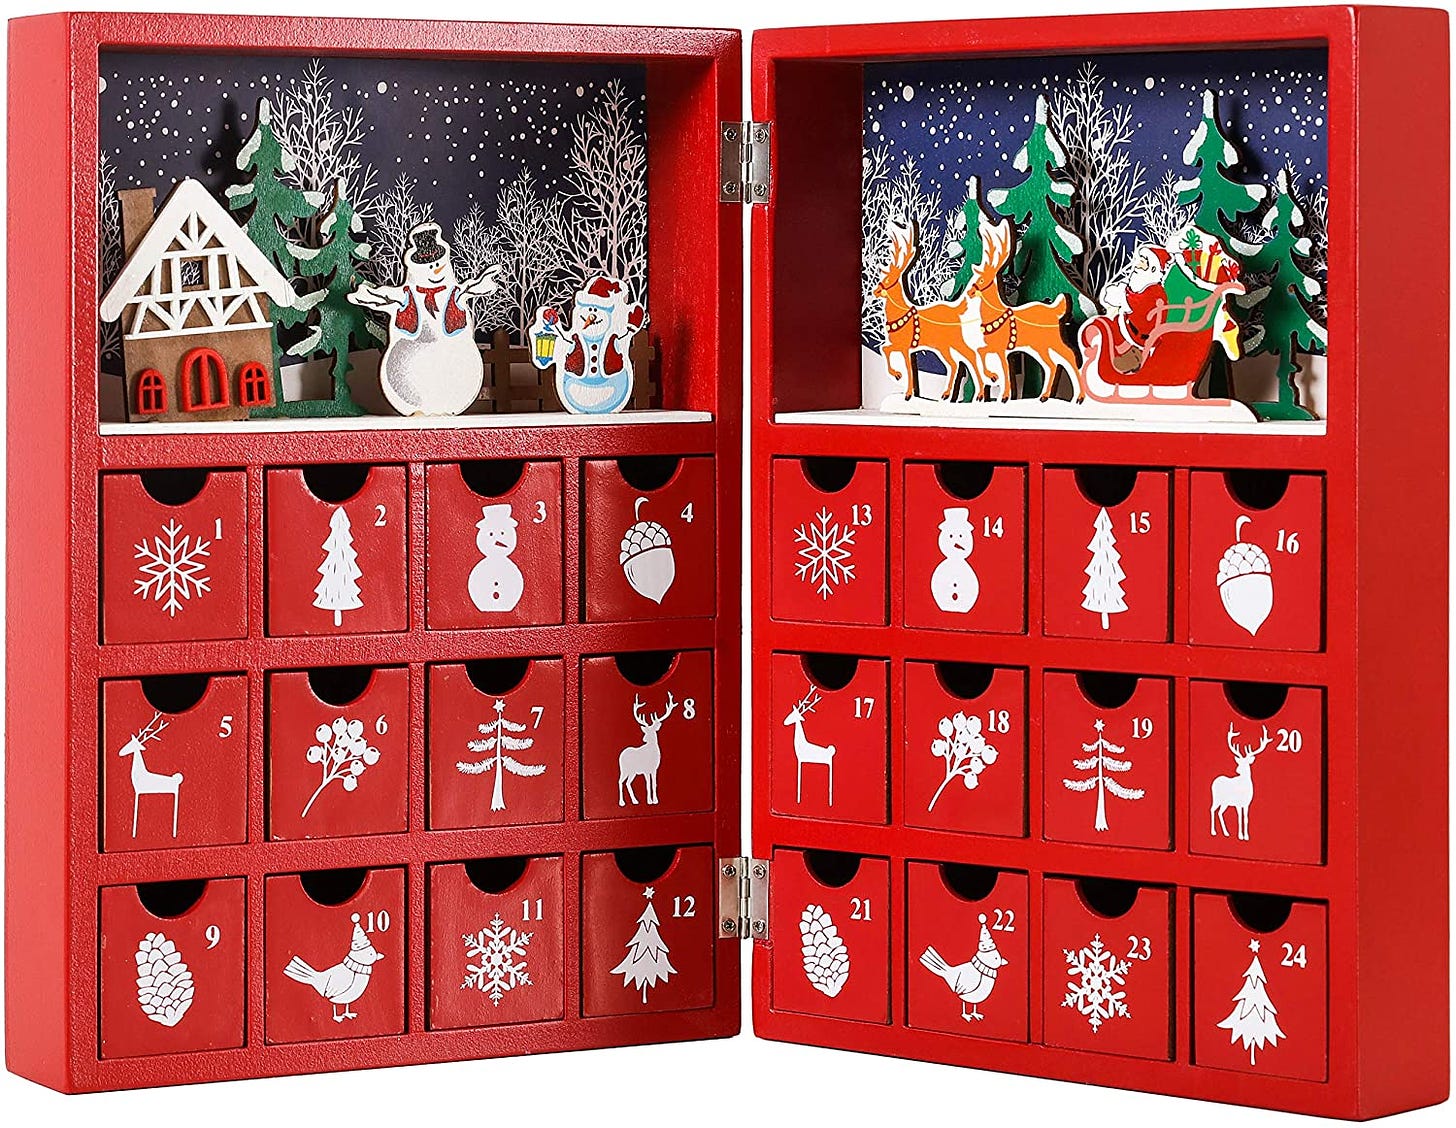 Buy BRUBAKER Reusable Wooden Advent Calendar to Fill - Red Christmas Book  with 24 Doors - DIY Christmas Calendar 8.27 x 3.54 x 11.81 inches Online in  Turkey. B07K7YDY46